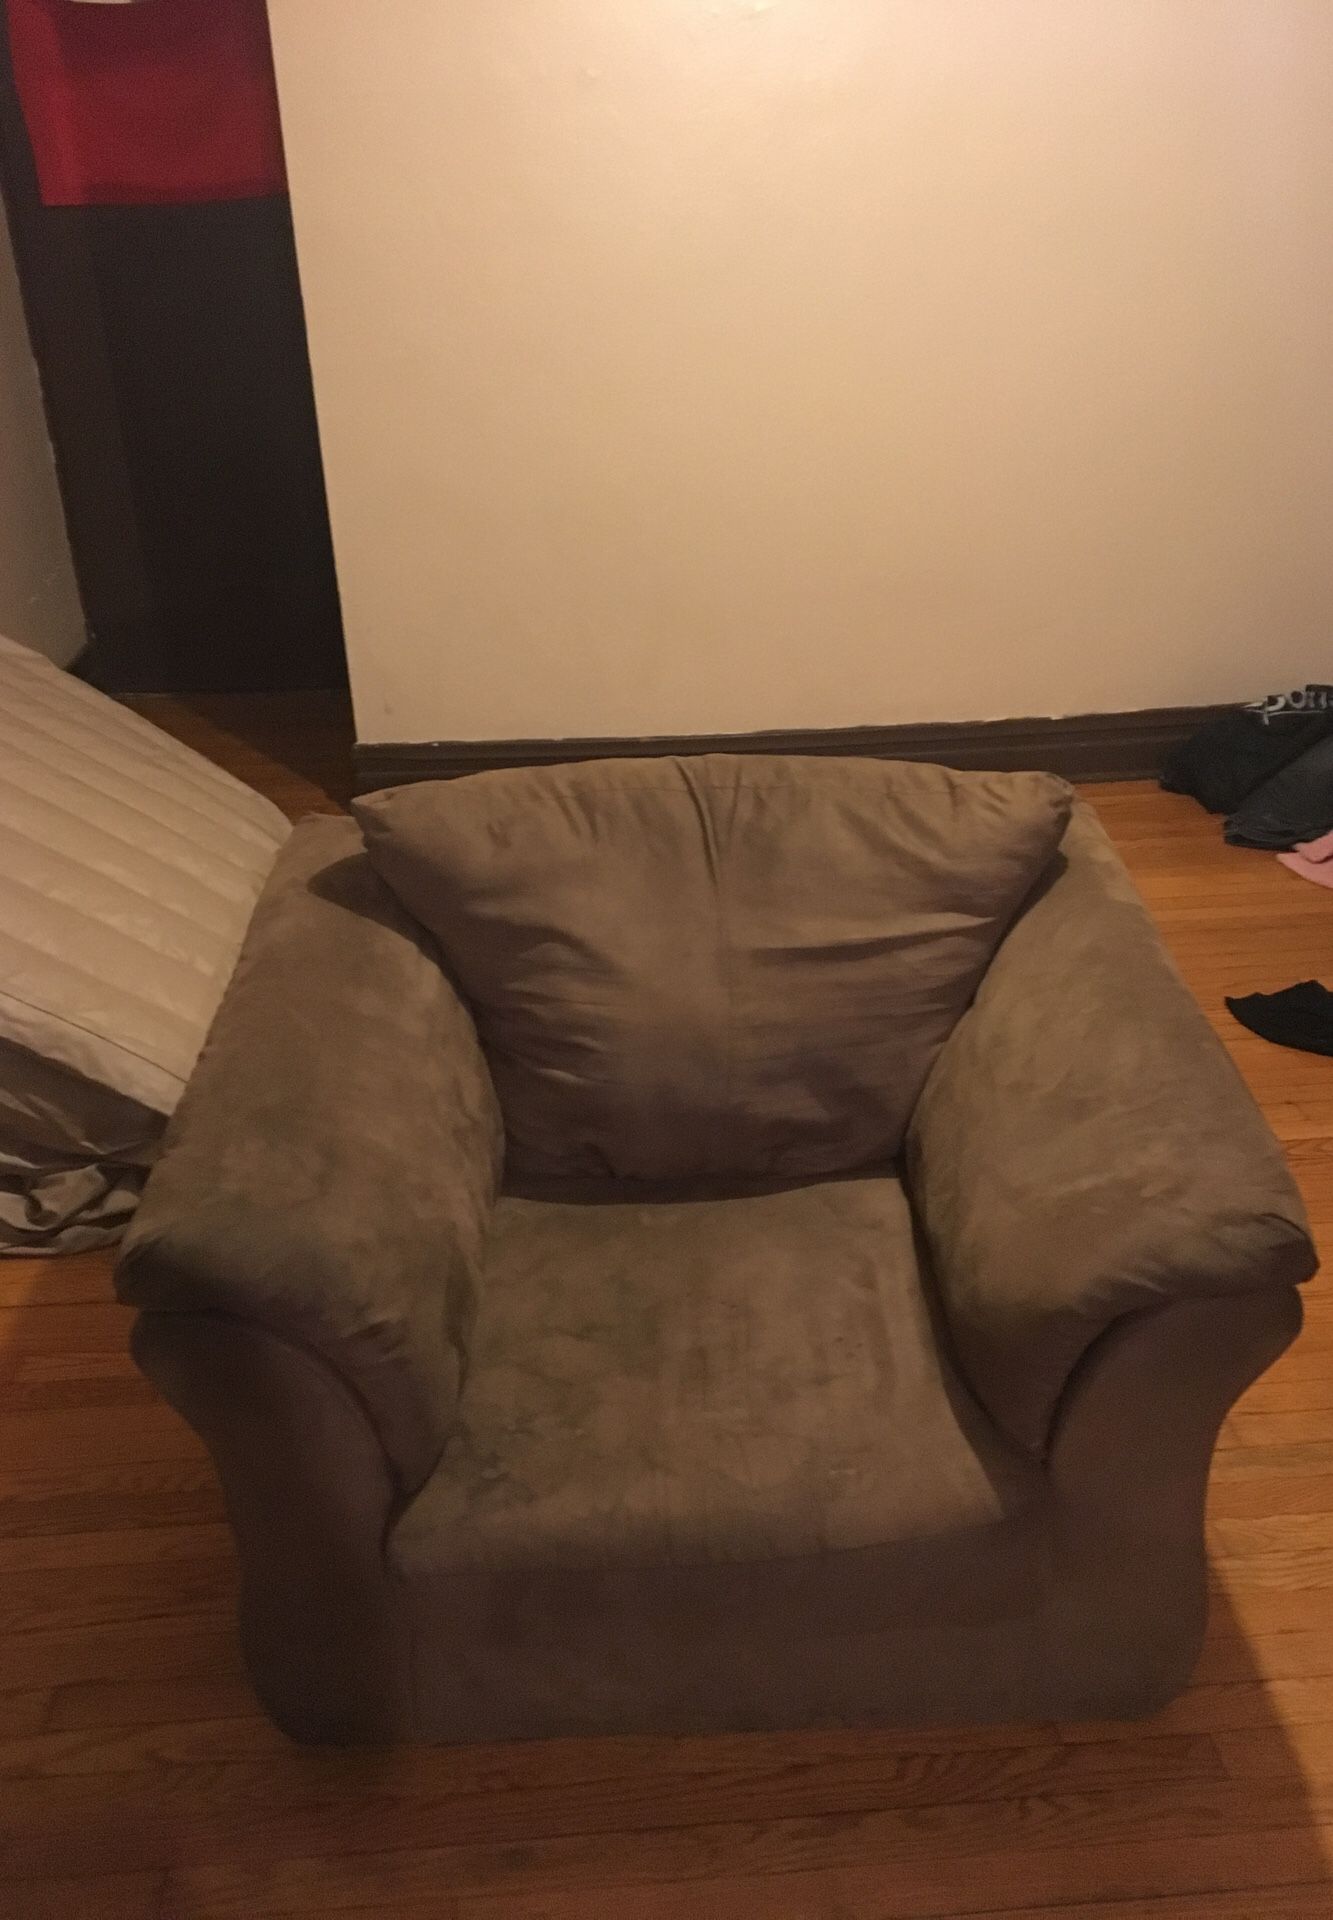 2 love seats (1 reclines) and kitchen table set. Nothing is worn all in good shape!! Prices are negotiable could be sold all together for around $100